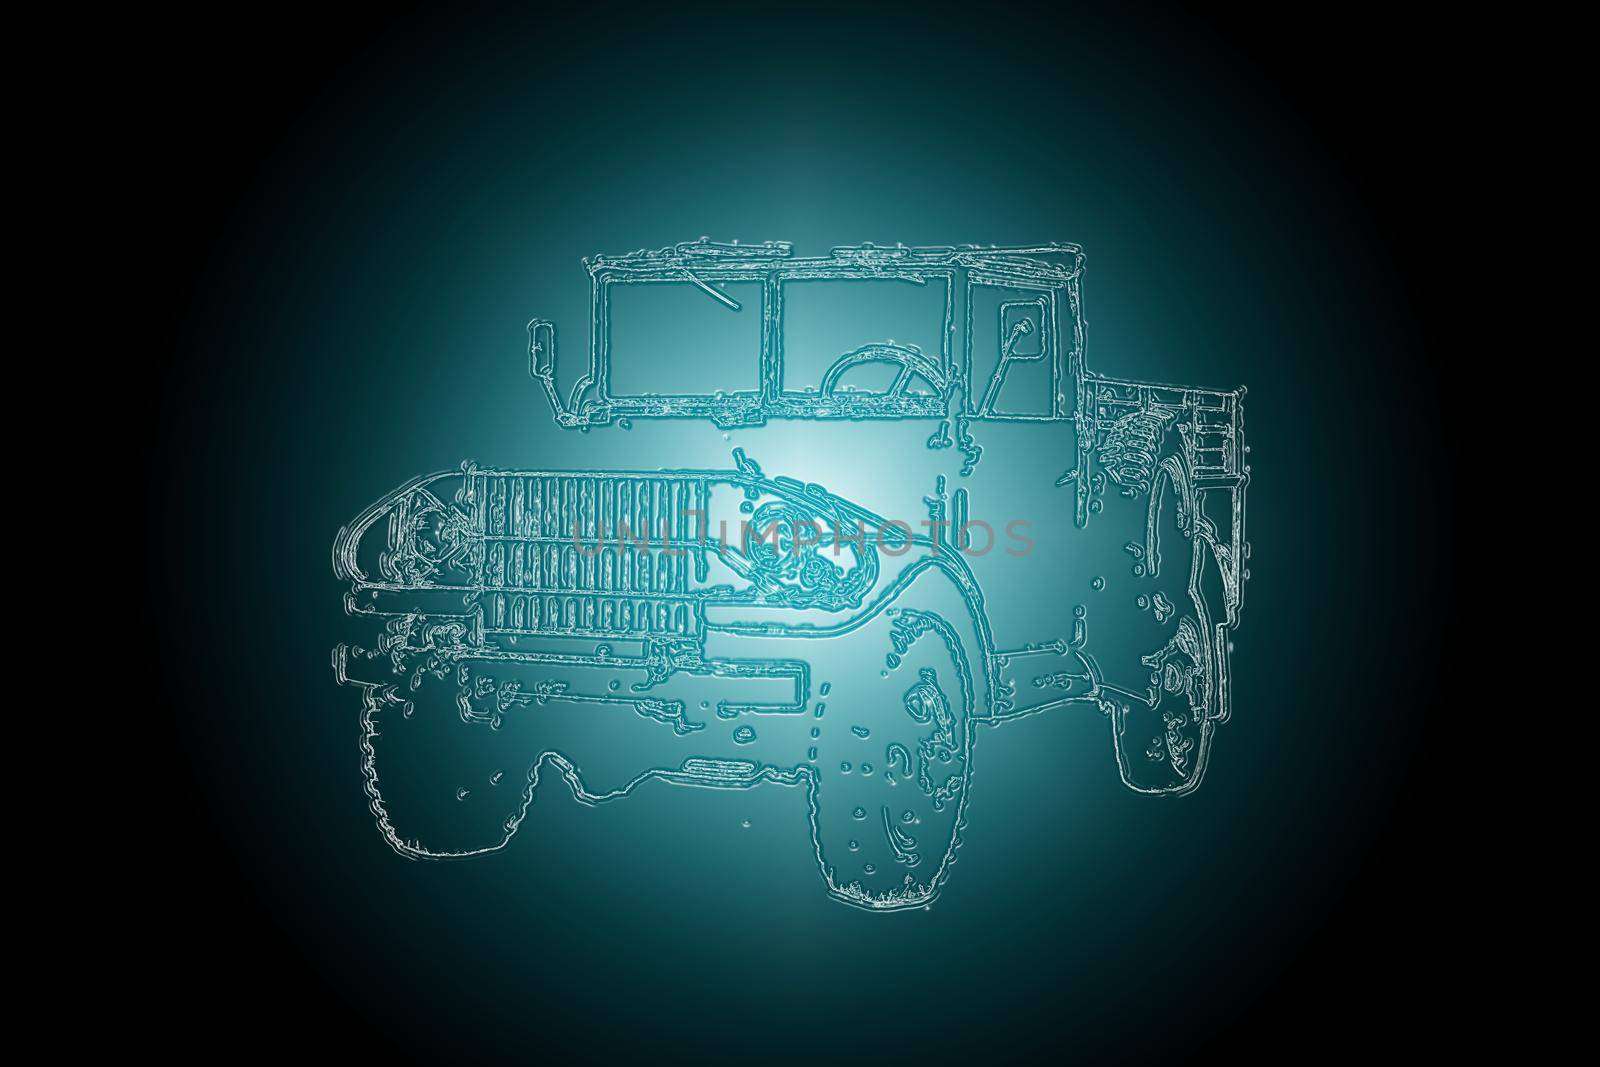 Image of an old army jeep parked in the studio, isolated on white background